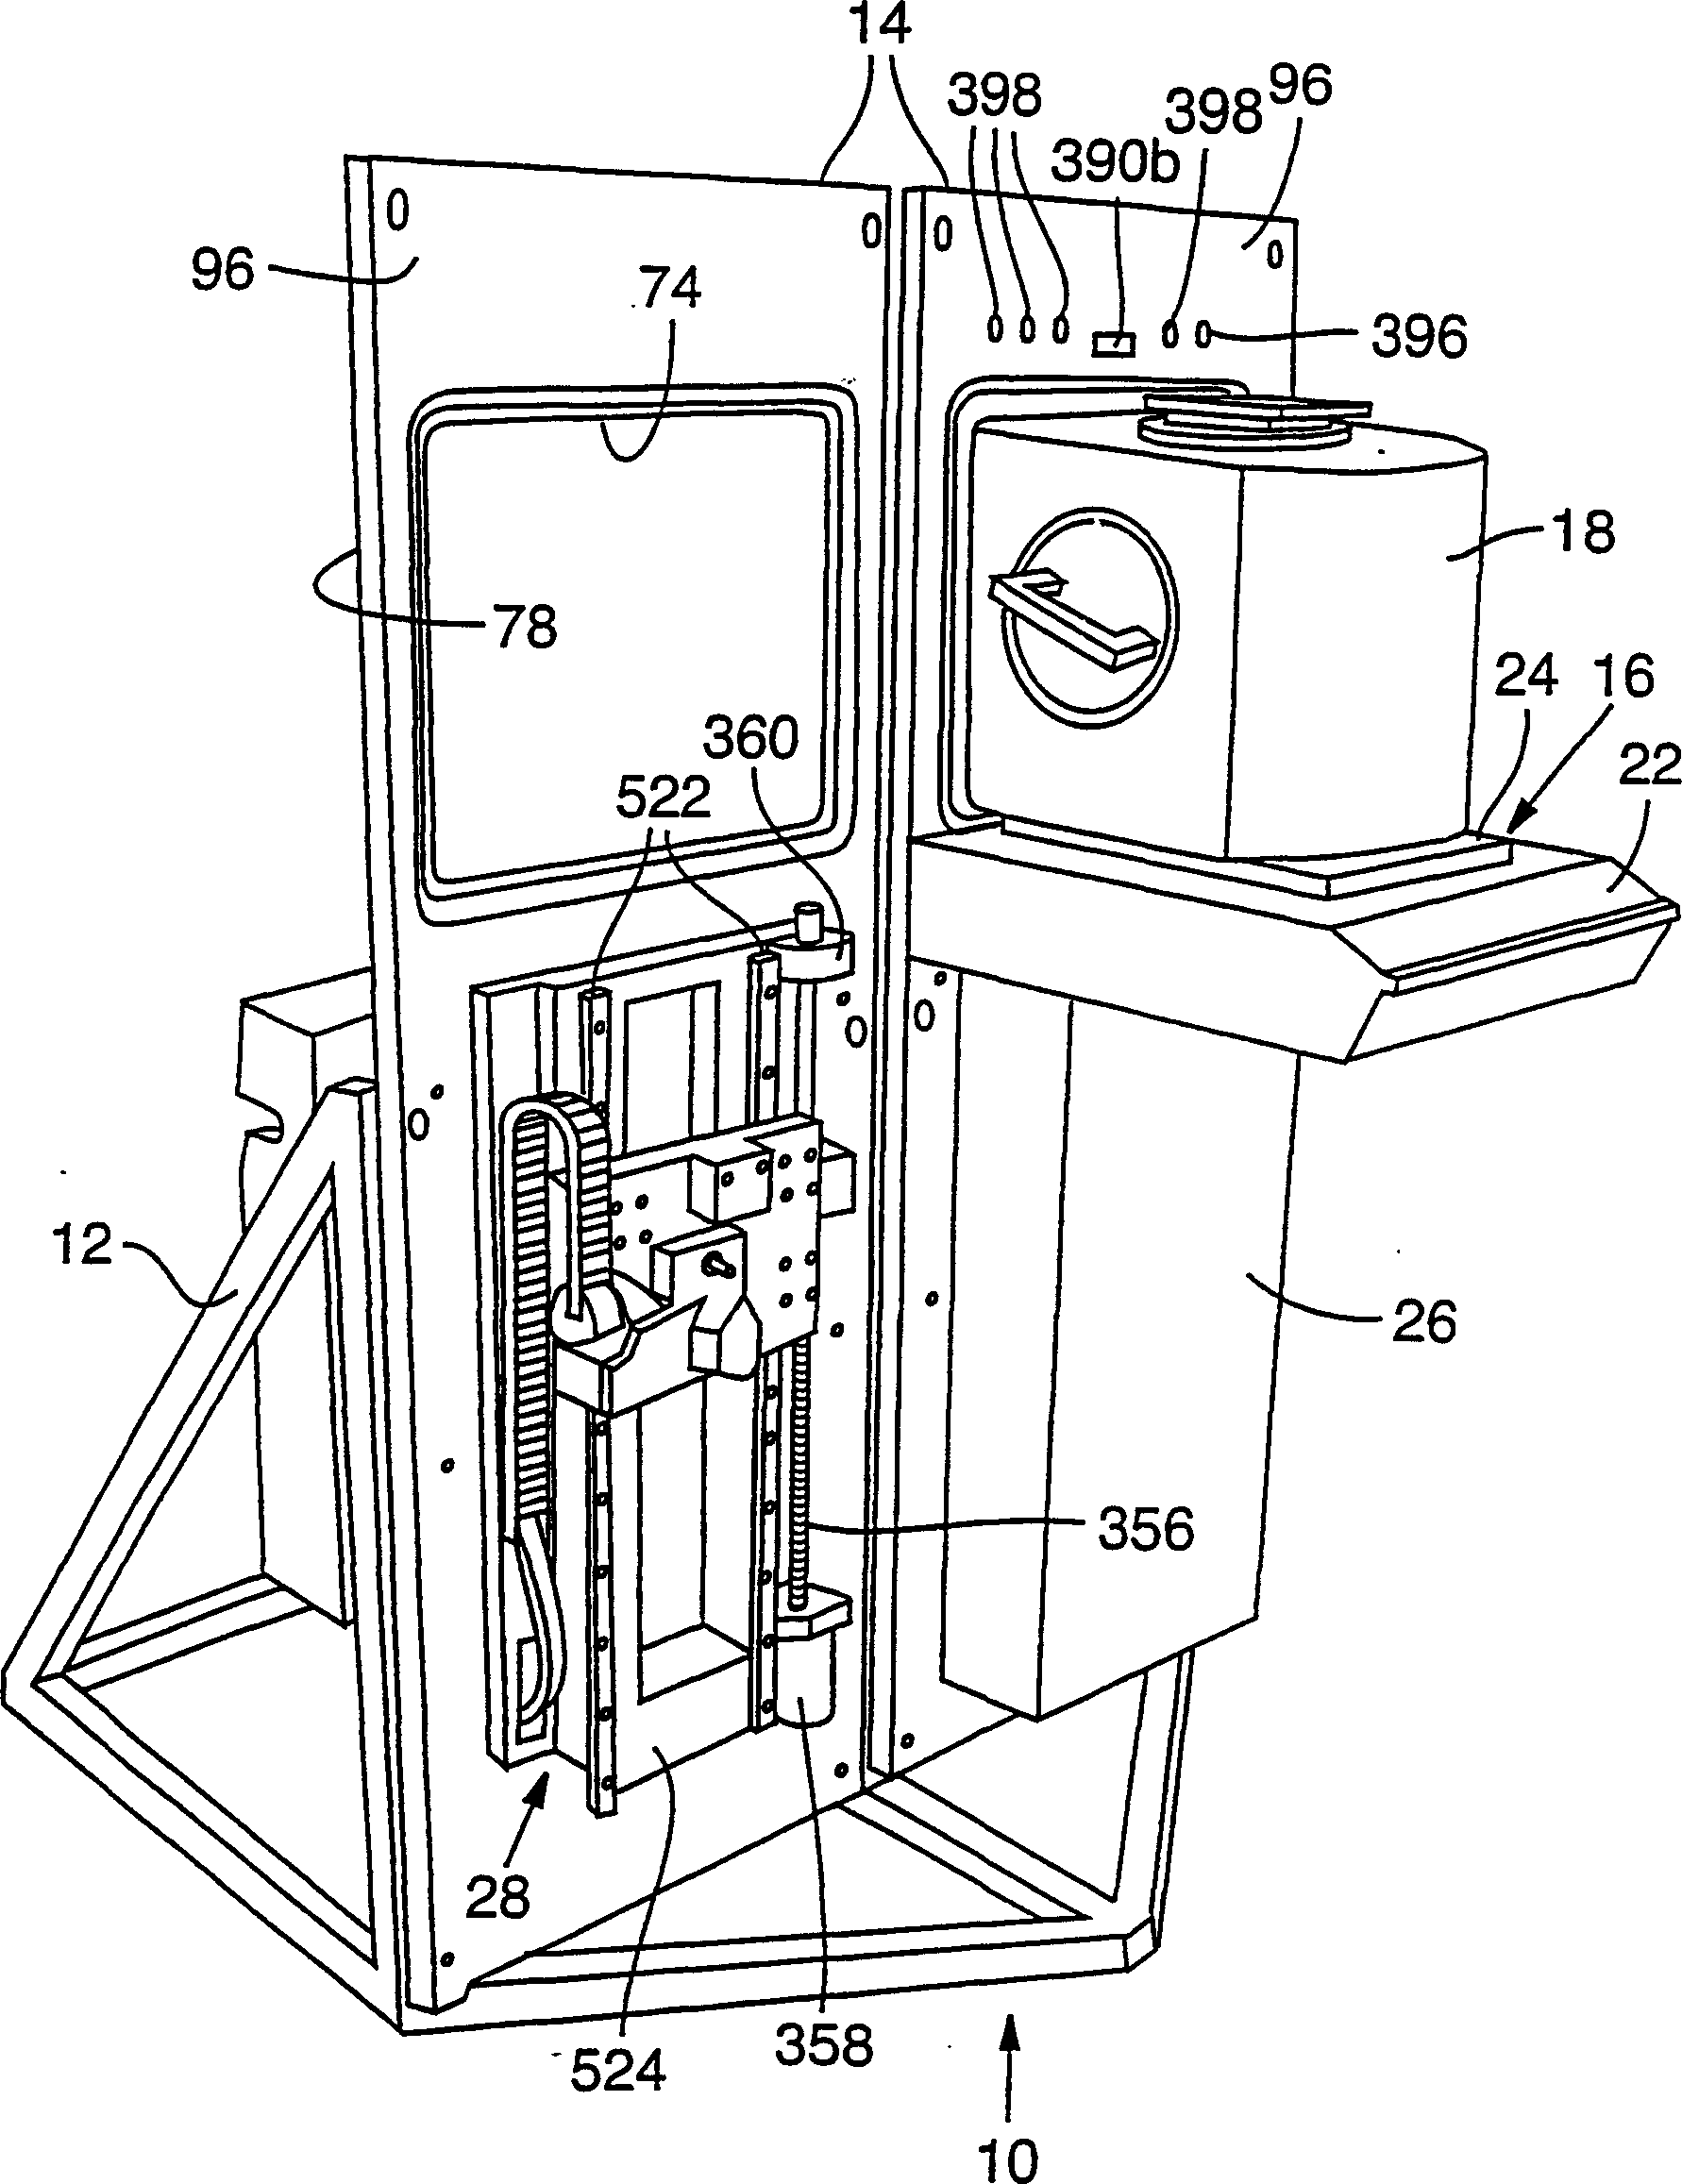 Pod load interface equipment adapted for implementation in a fims system